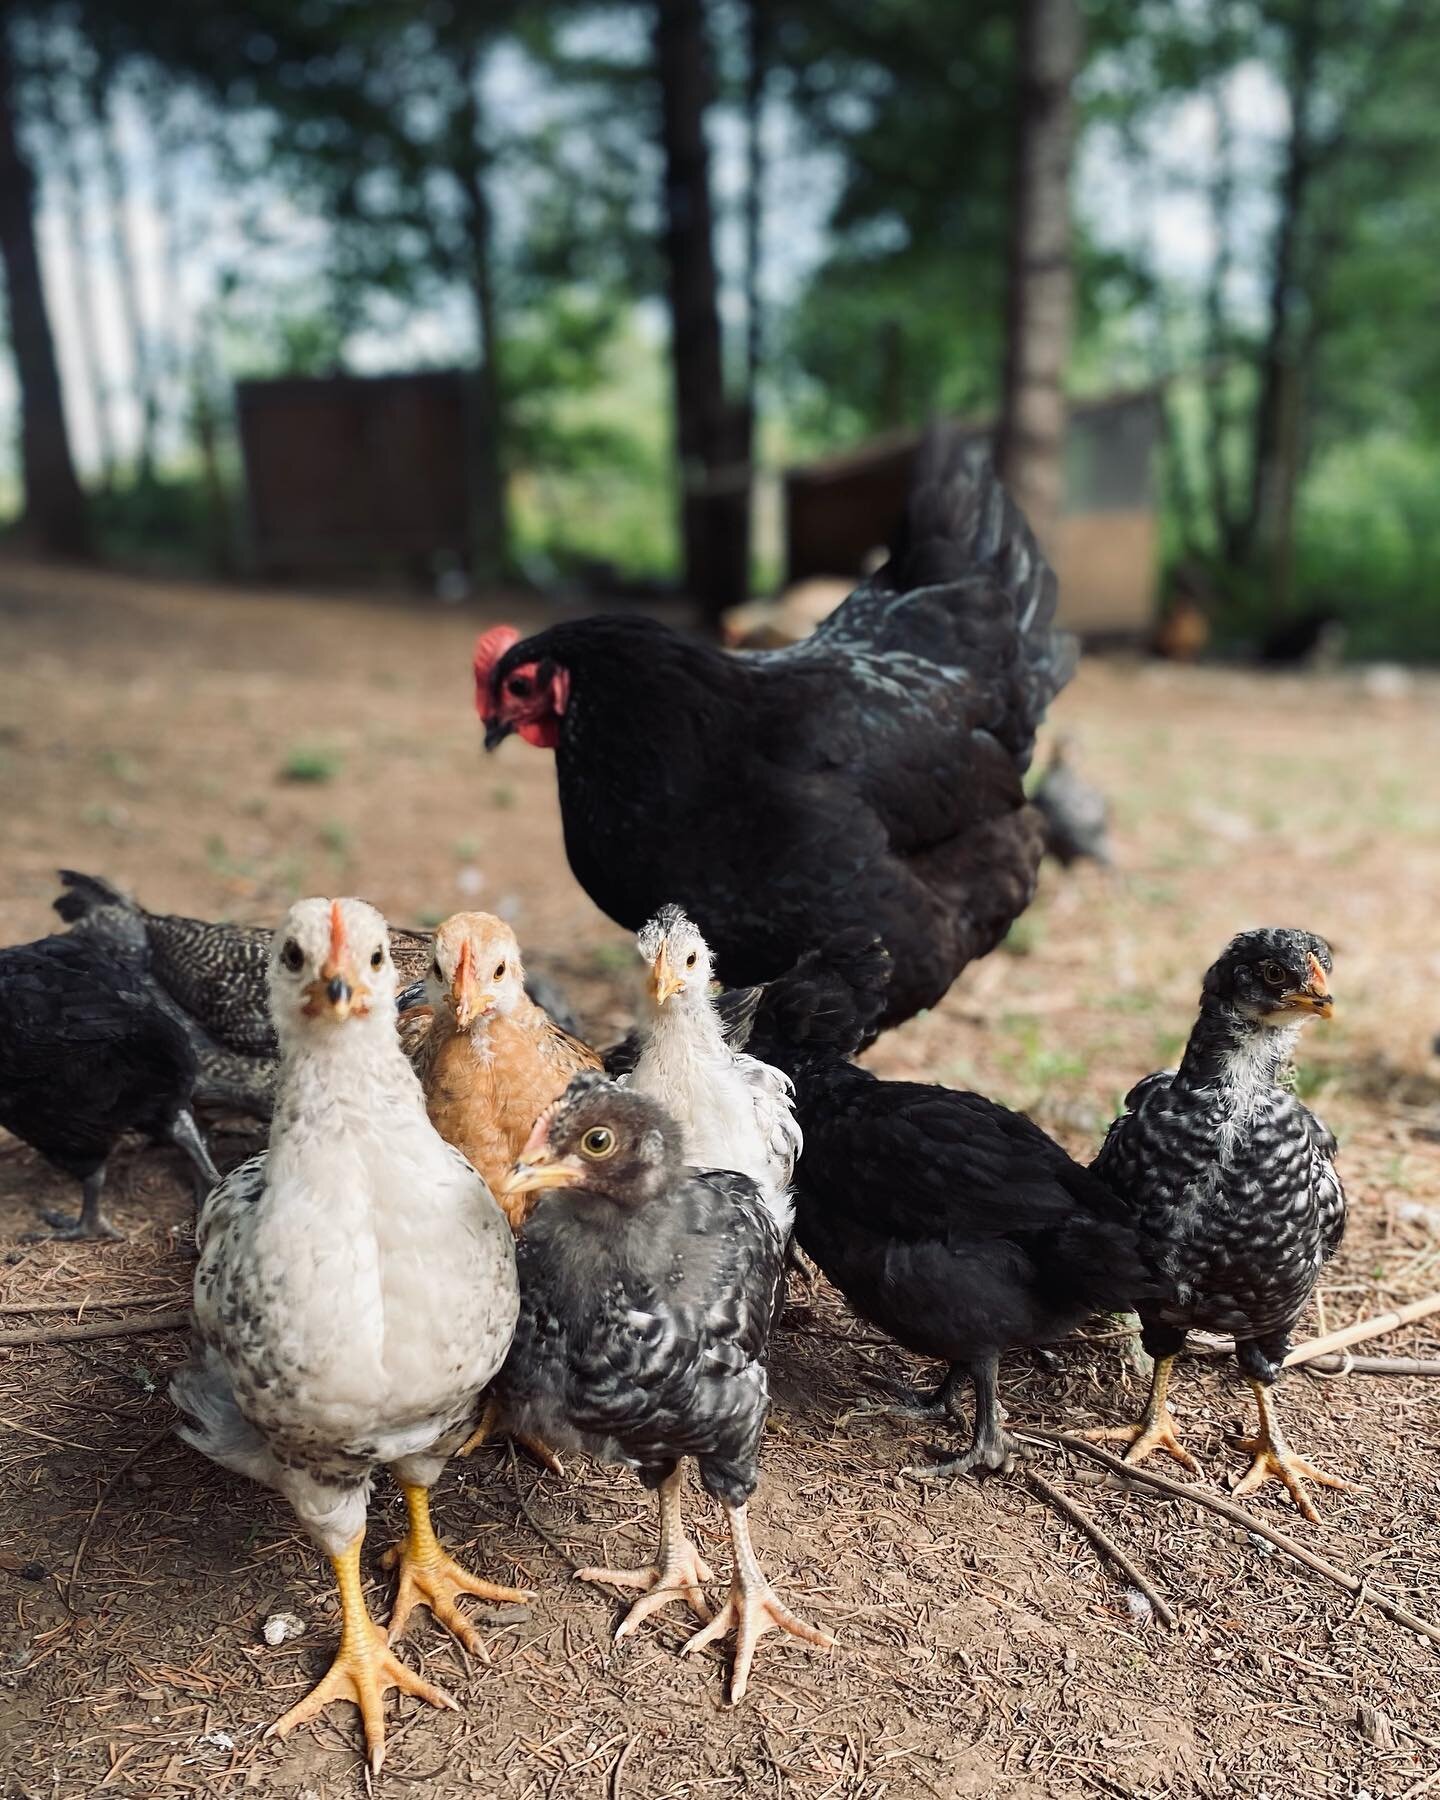 So many feathered friends.

When I went to Australia this summer I returned to the news that my kiddies had put eggs under three broody chickens 😳, they were very proud of themselves and their ingenuity, I was more of the mind, &lsquo;well wonderful